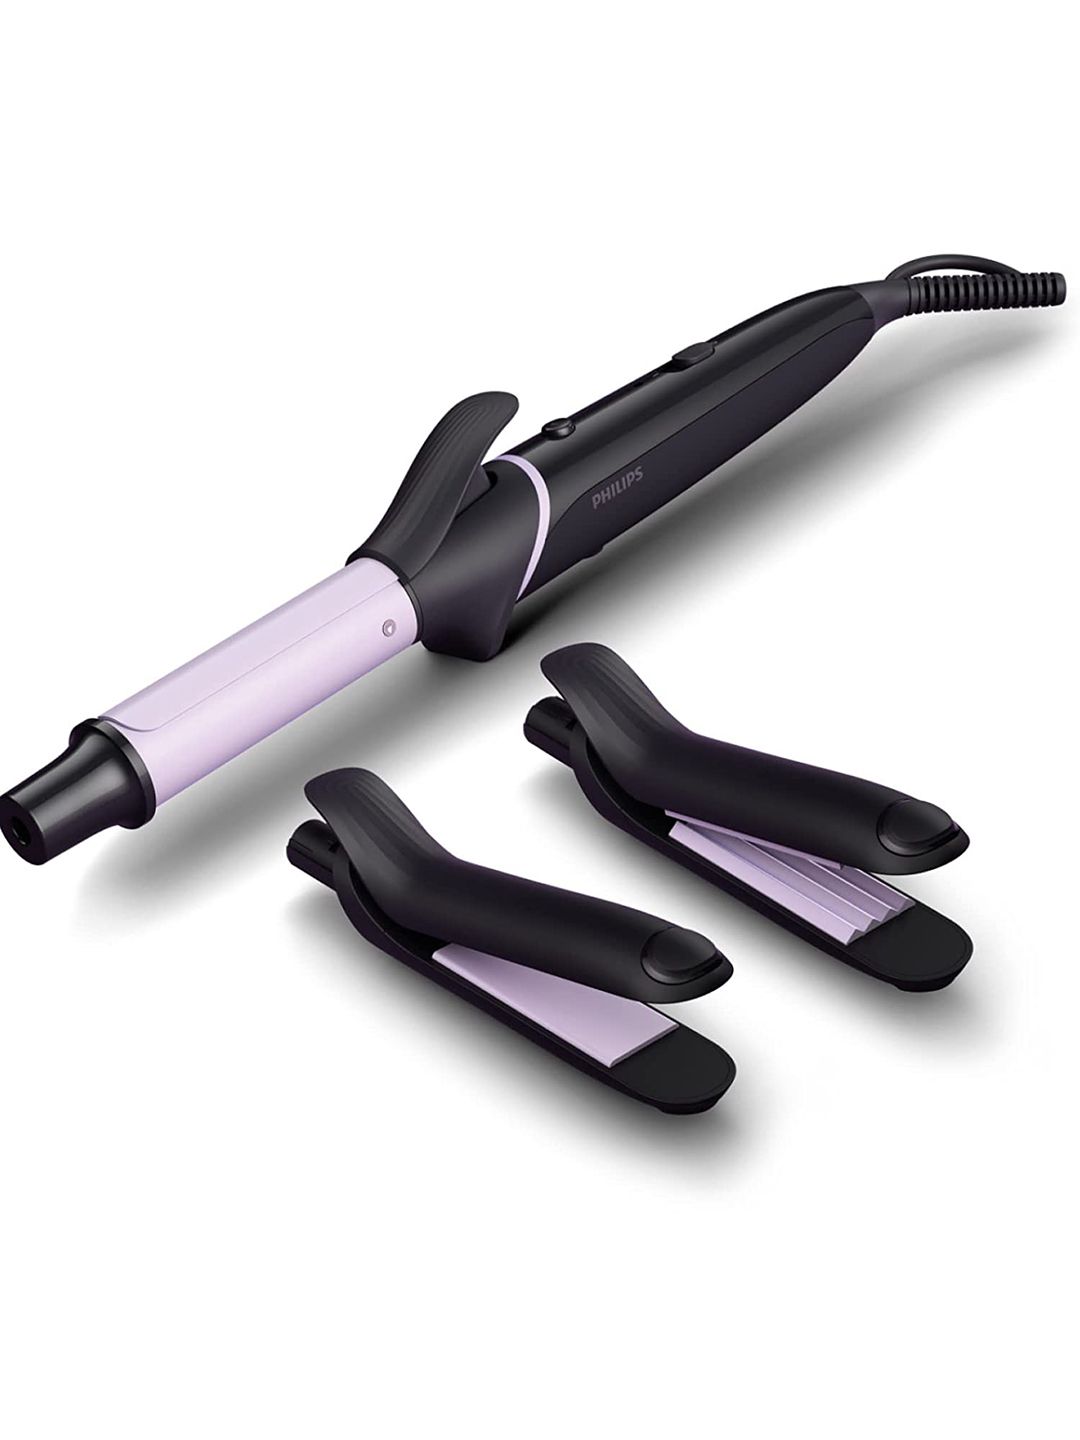 Philips Black & Purple Hair Styling Set BHH816/00 with Hair Crimper-Straightener & Curler Price in India